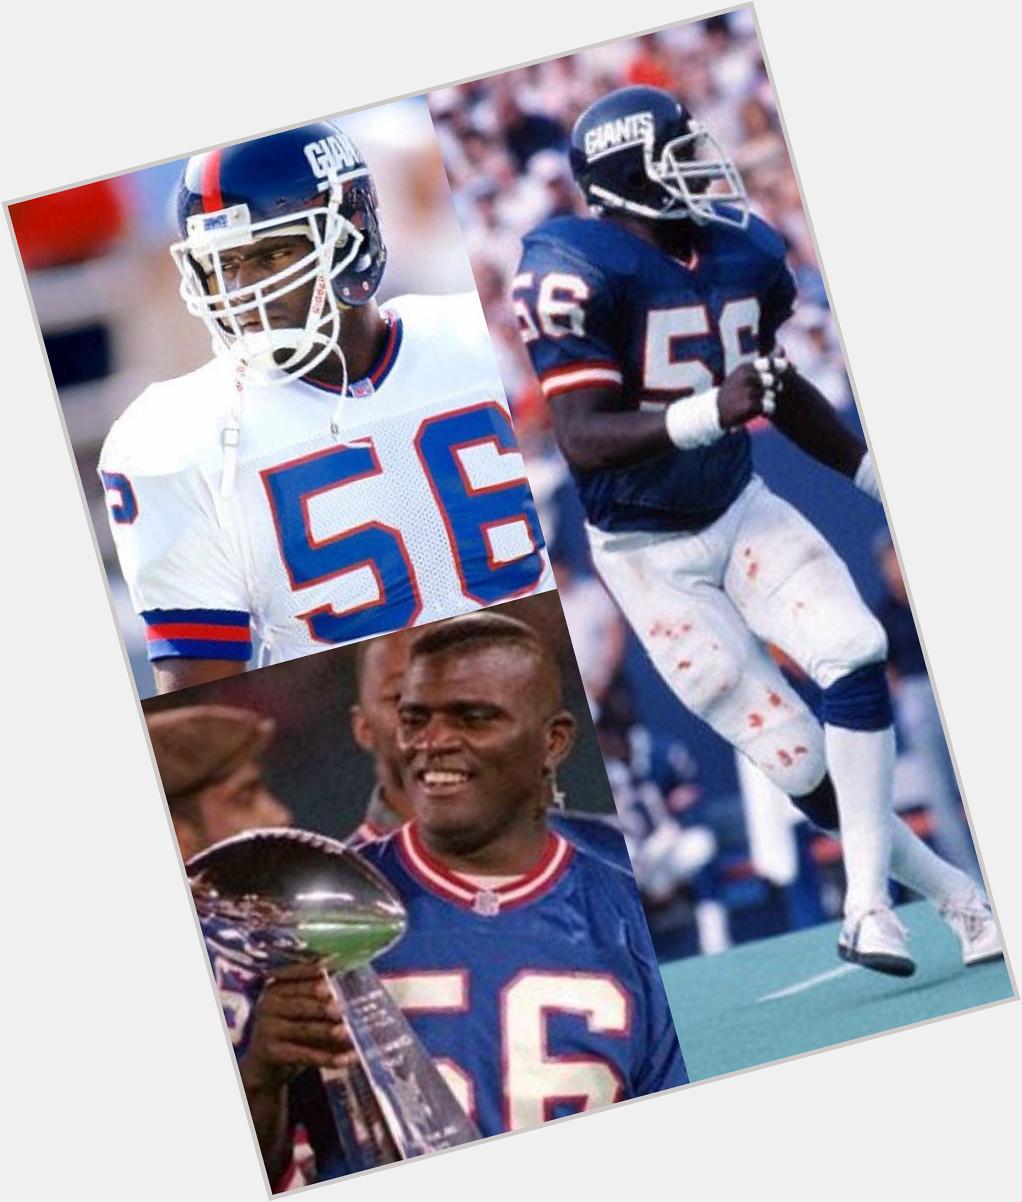 HAPPY BIRTHDAY TO THE LEGEND LAWRENCE TAYLOR!!! BIG DAWG L.T YOU CHANGED THE GAME REGARDLESS OF YOUR REP  